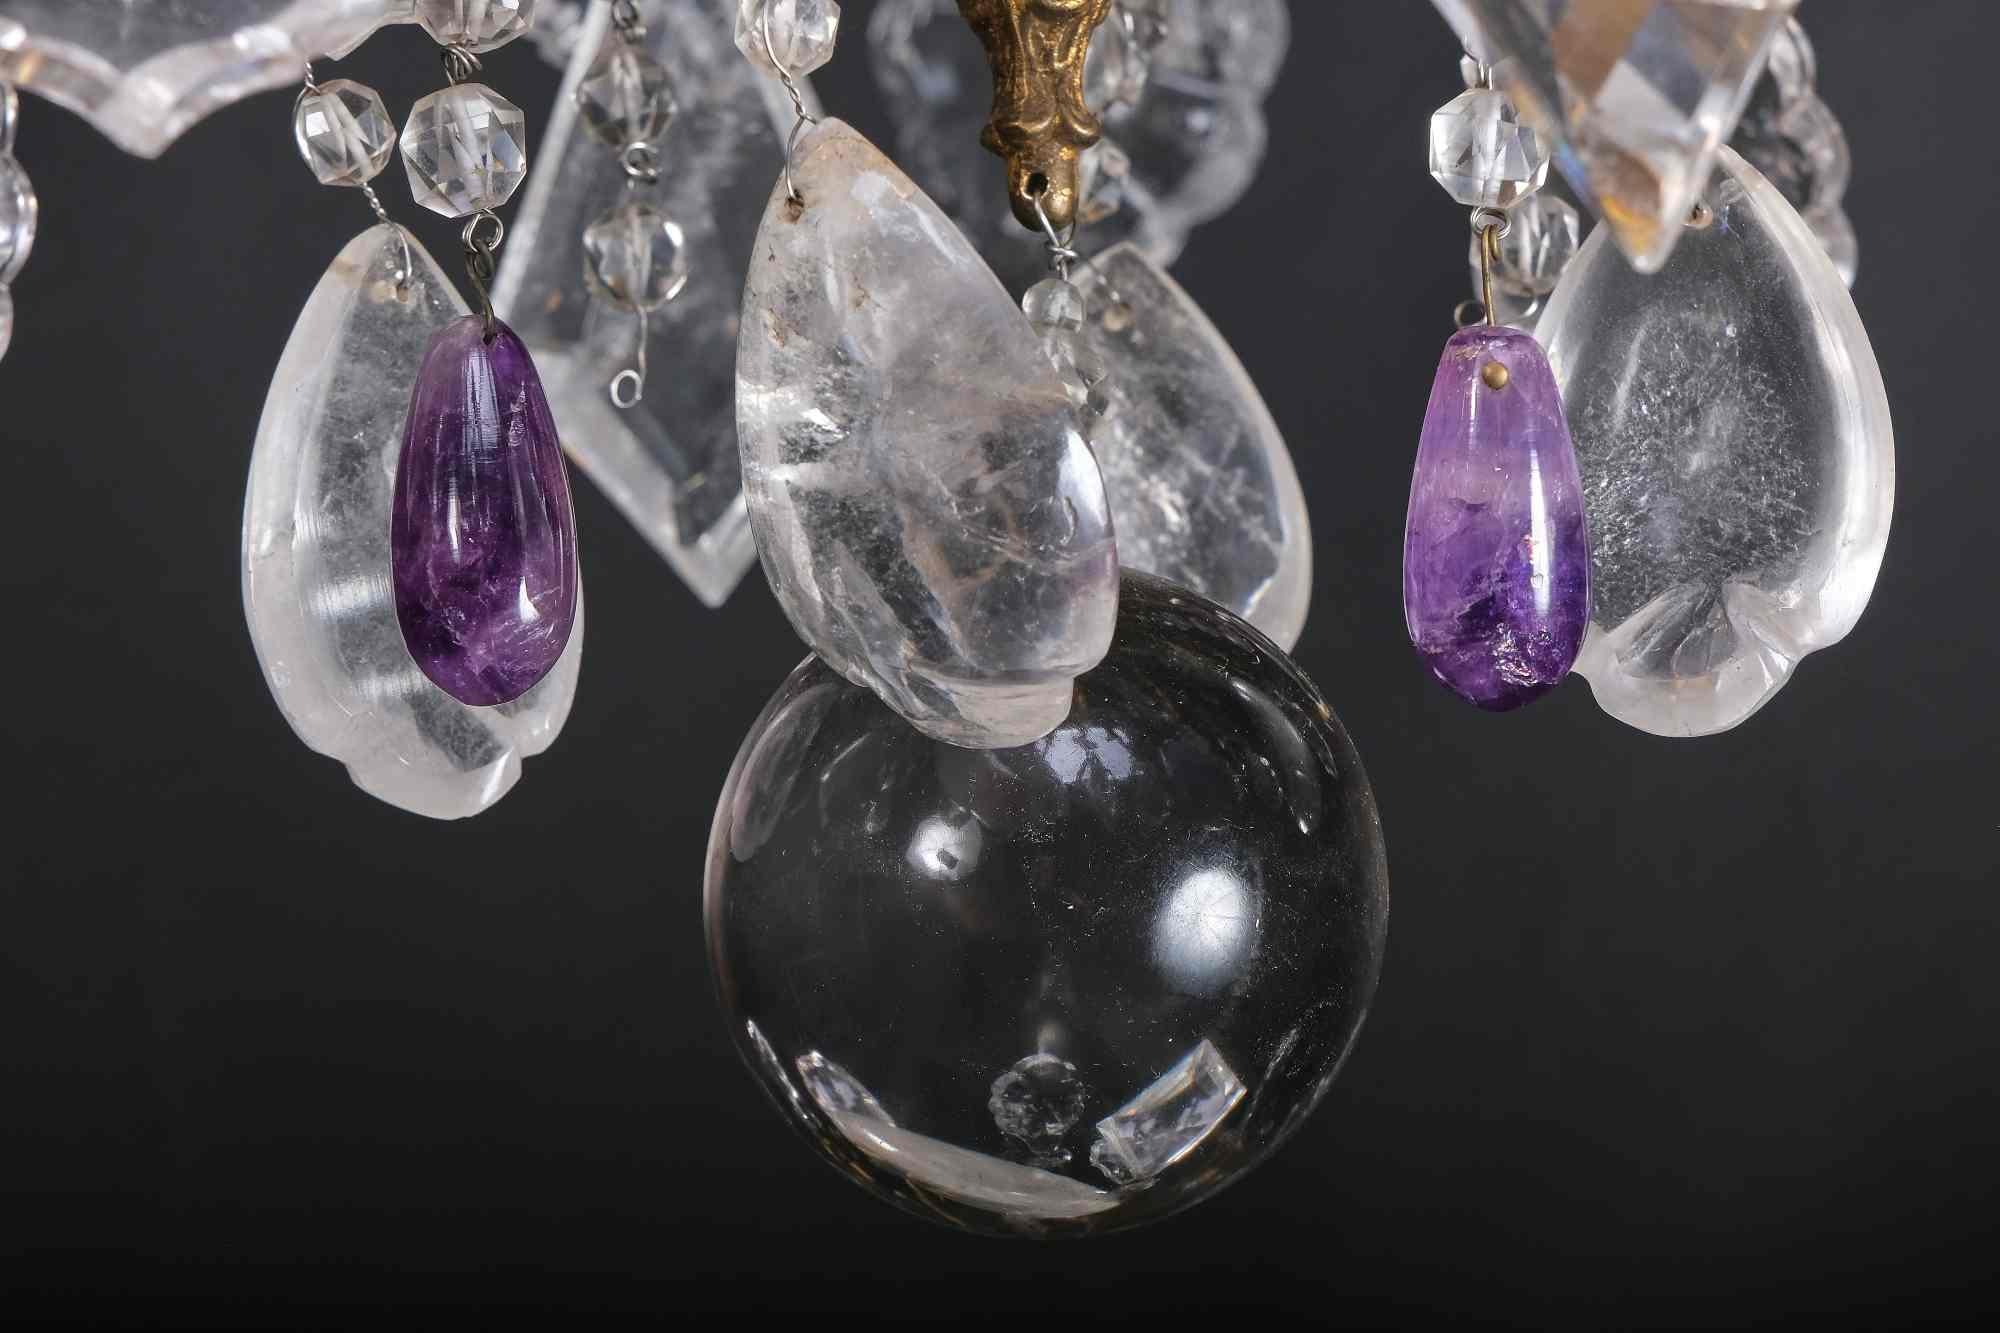 Extraordinary Italian Chandelier in Rock Crystal and Amethyst, Rome 19th Century For Sale 4